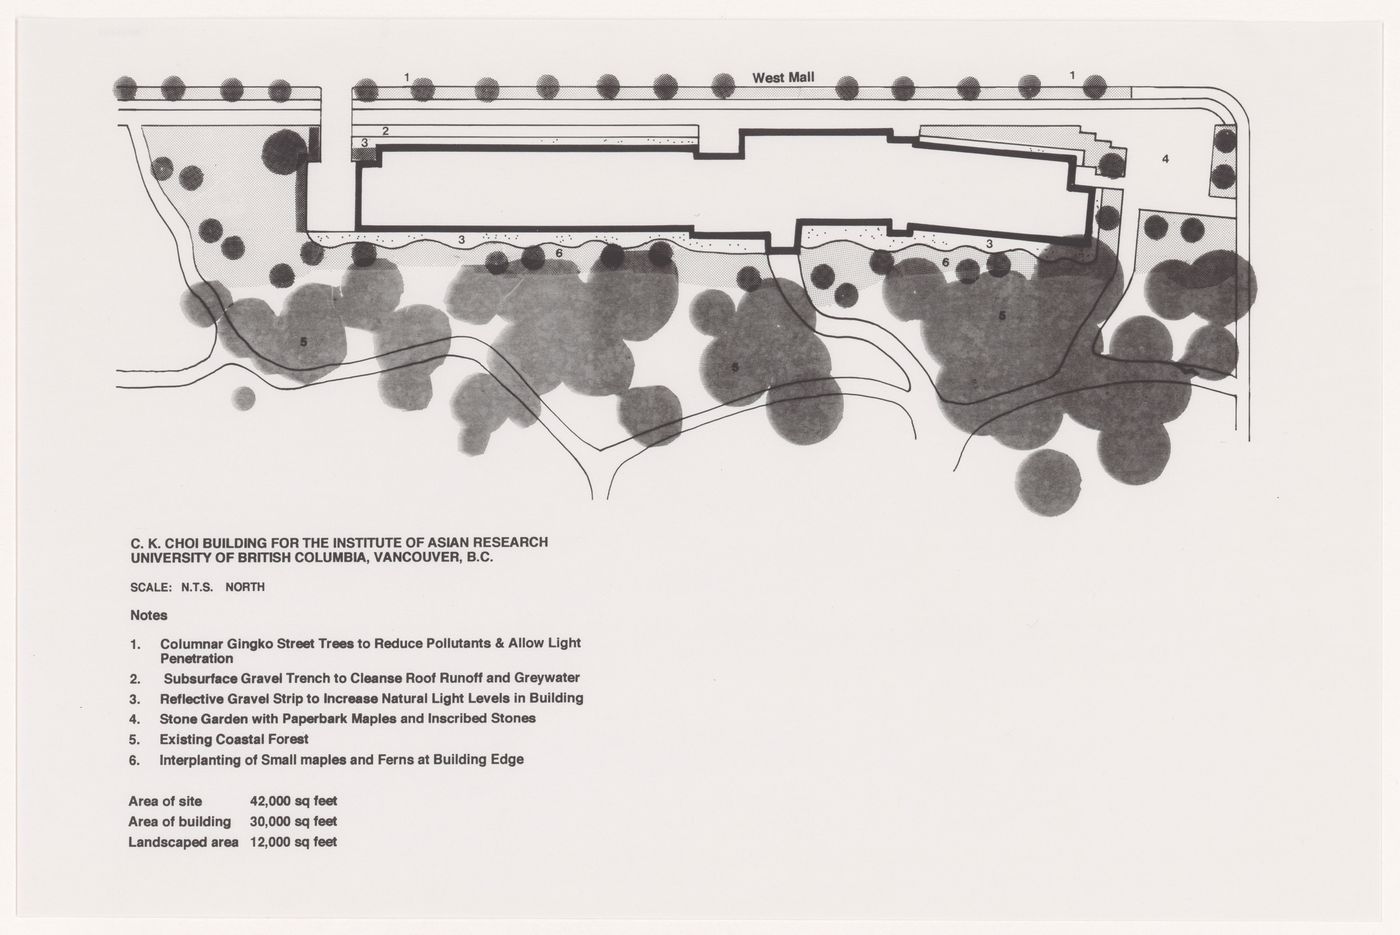 General landscape plan for C. K. Choi Institute of Asian Research, University of British Columbia, Vancouver, British Columbia